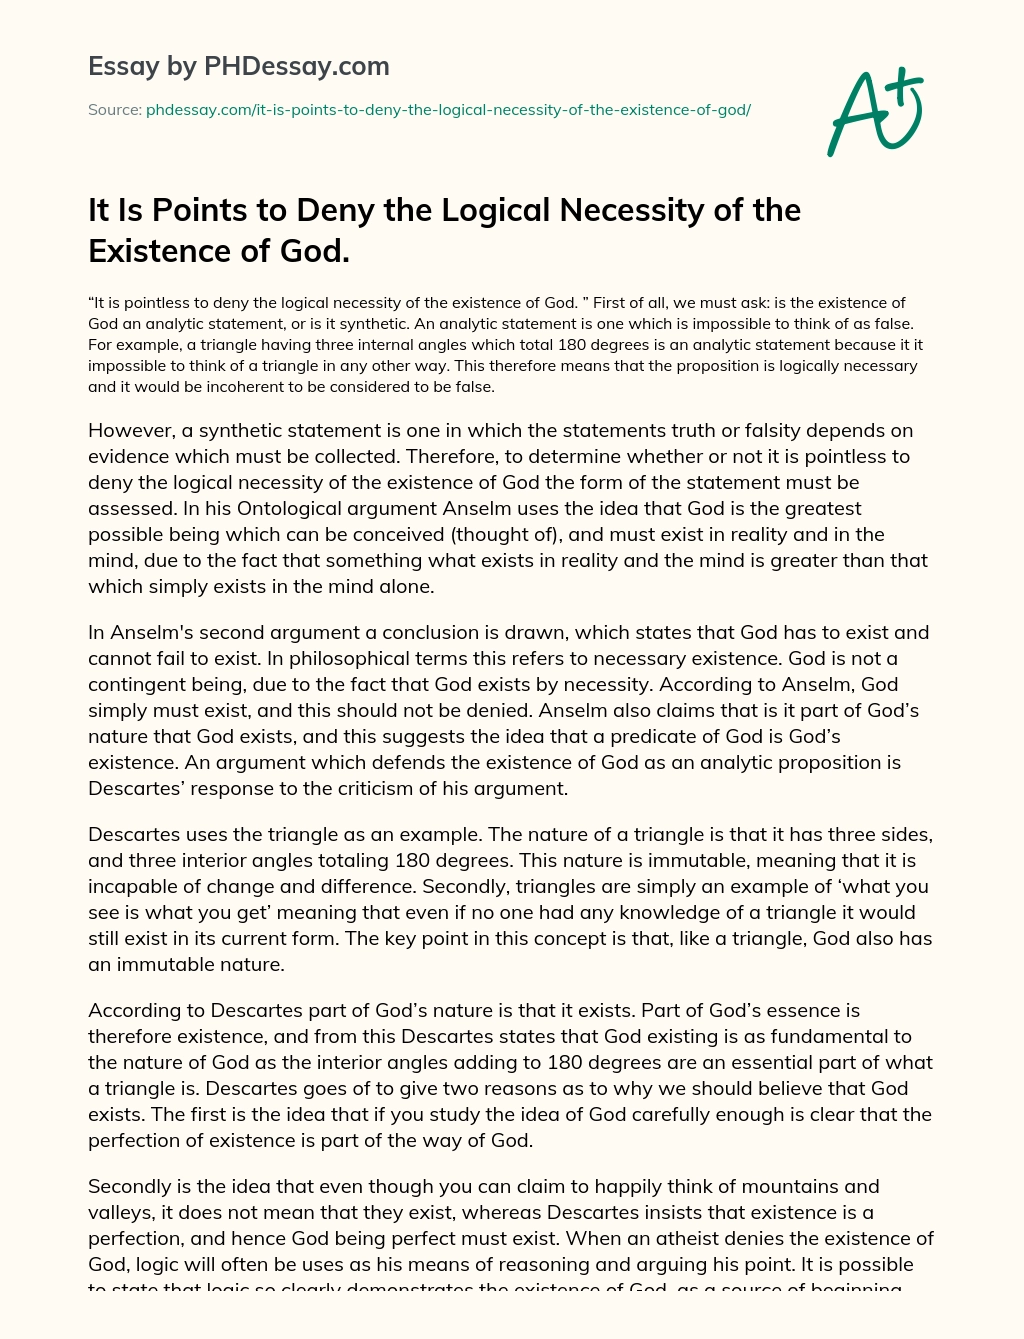 It Is Points to Deny the Logical Necessity of the Existence of God essay